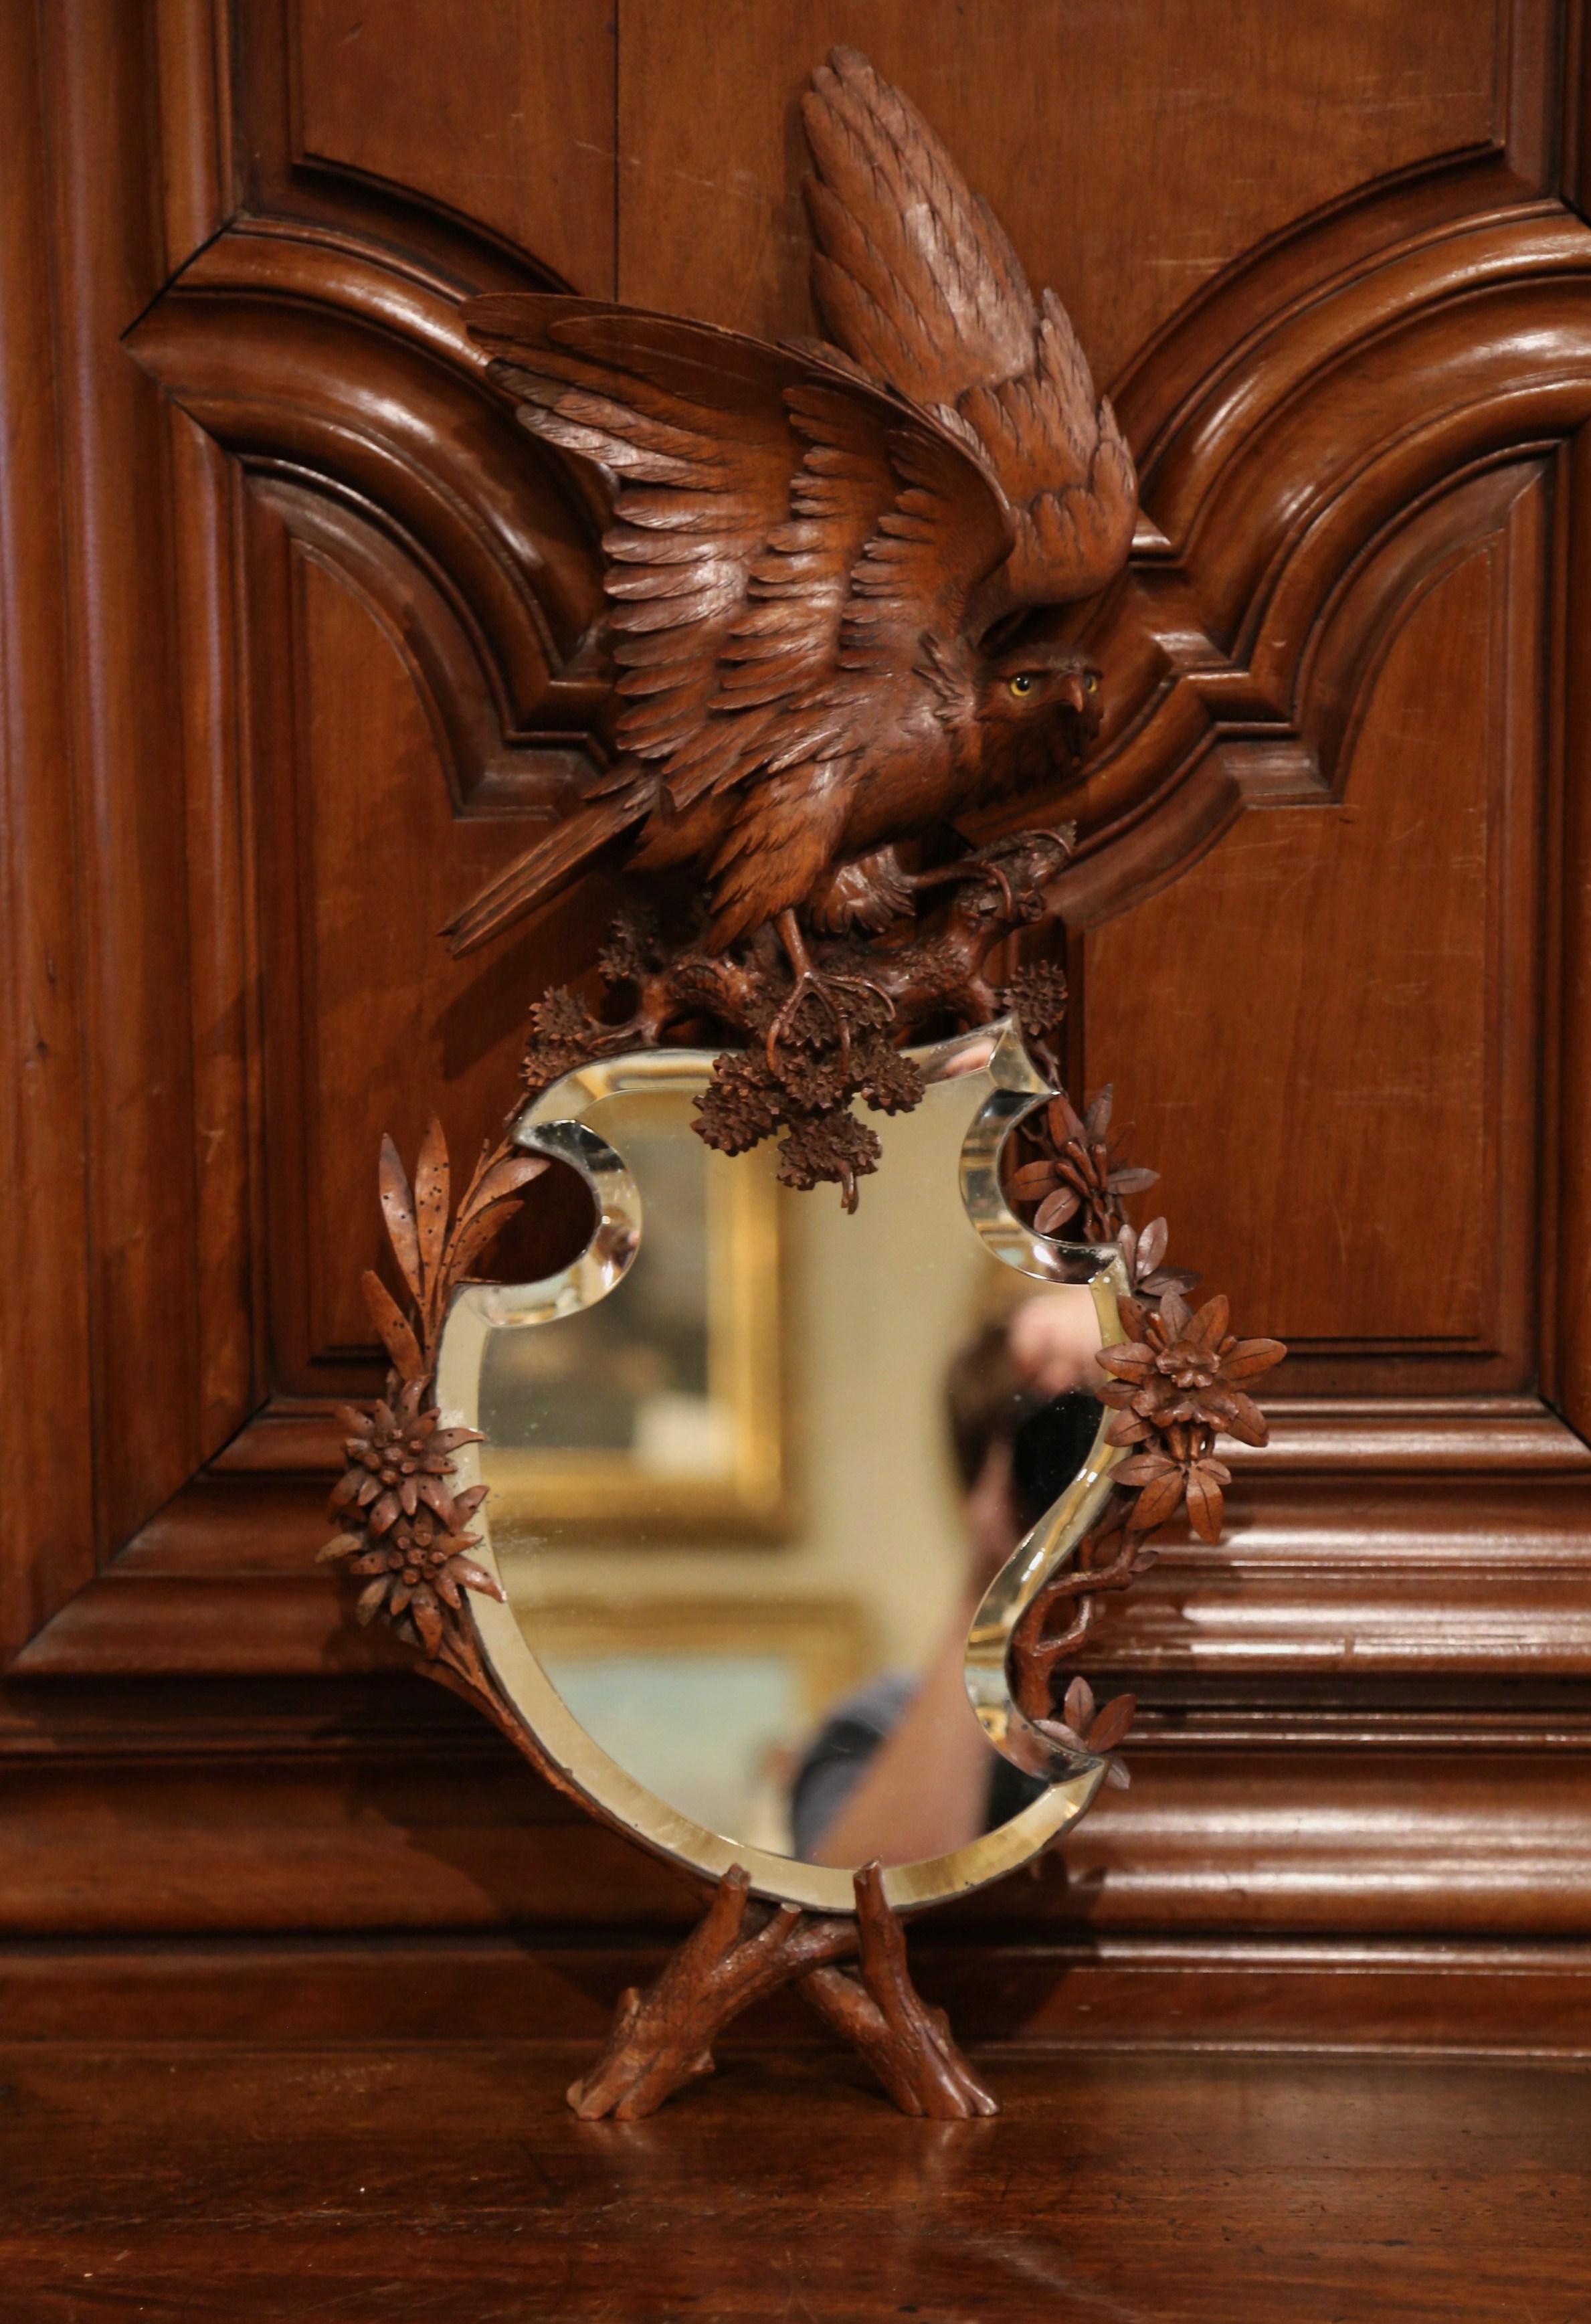 Mercury Glass 19th Century French Black Forest Carved Walnut Mirror with Eagle Sculpture